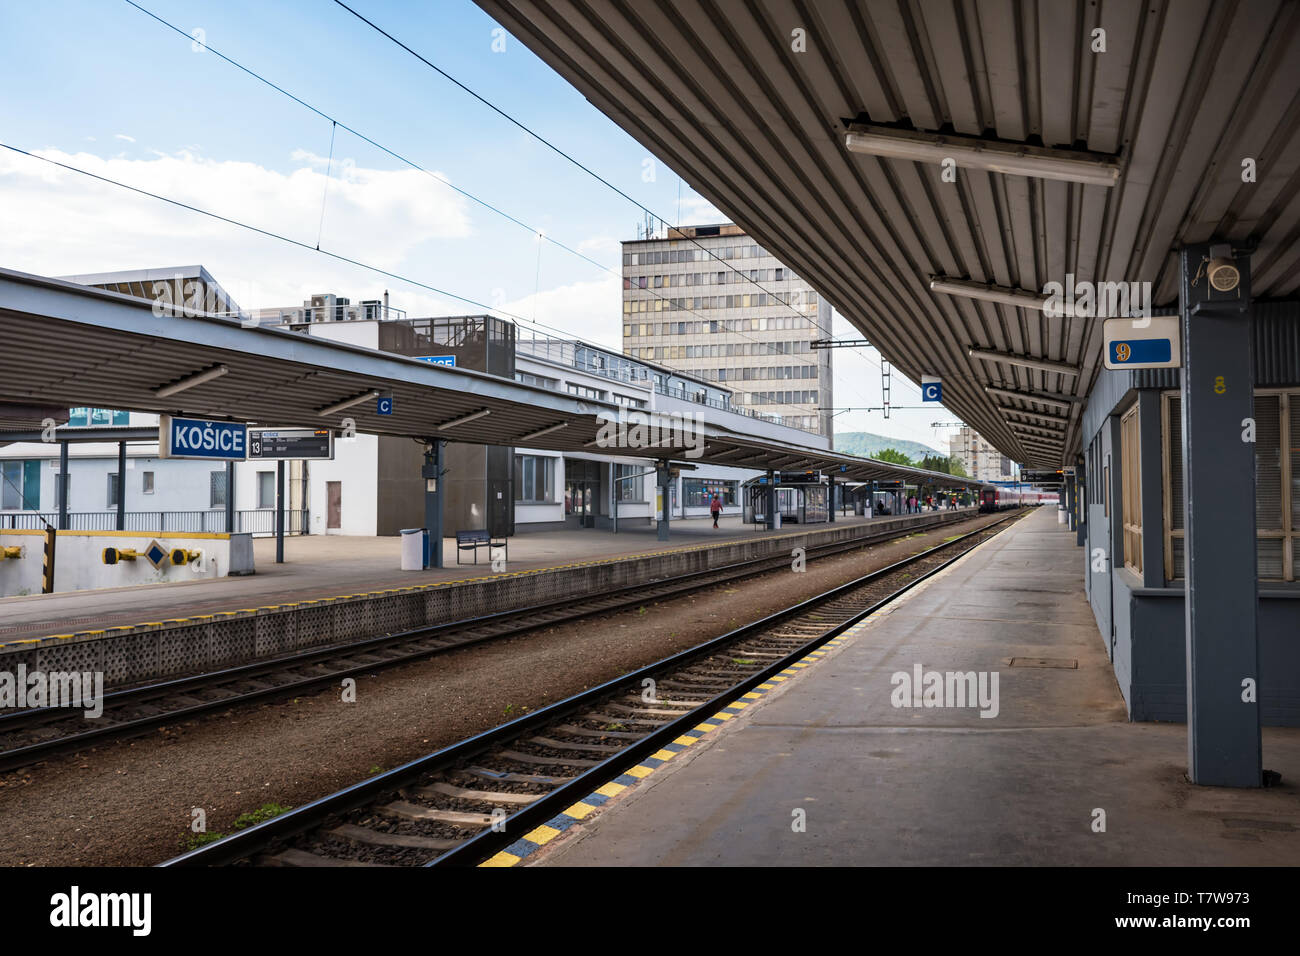 Rails and platforms of Main railway station in Kosice (Slovakia) Stock Photo